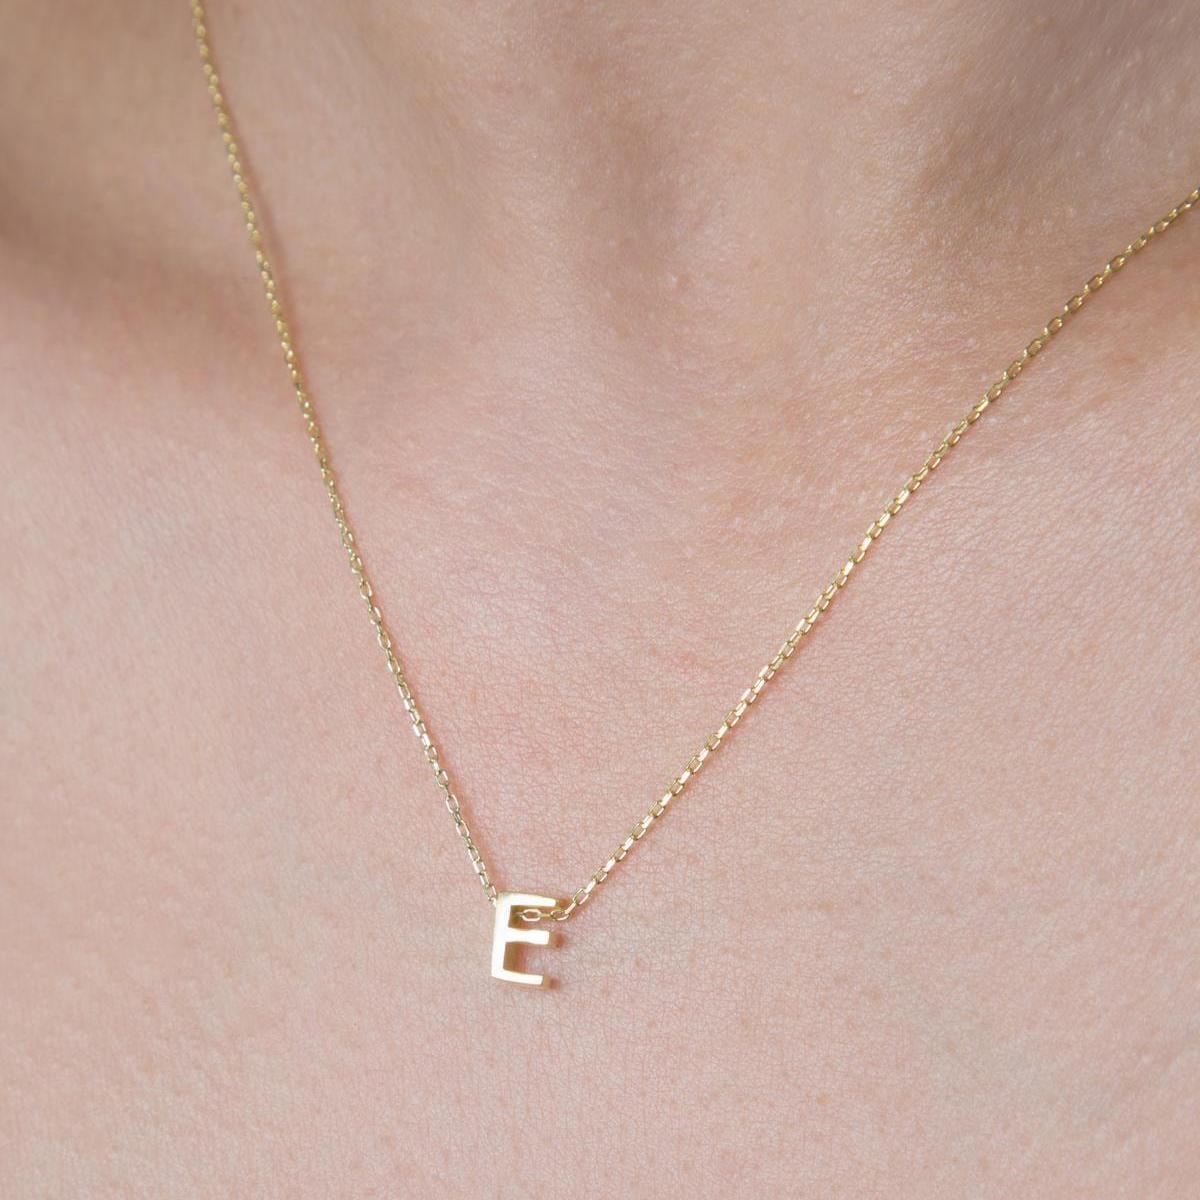 E Initial Necklace Gold • 14K Gold Initial Necklace • Gift For Her - Trending Silver Gifts